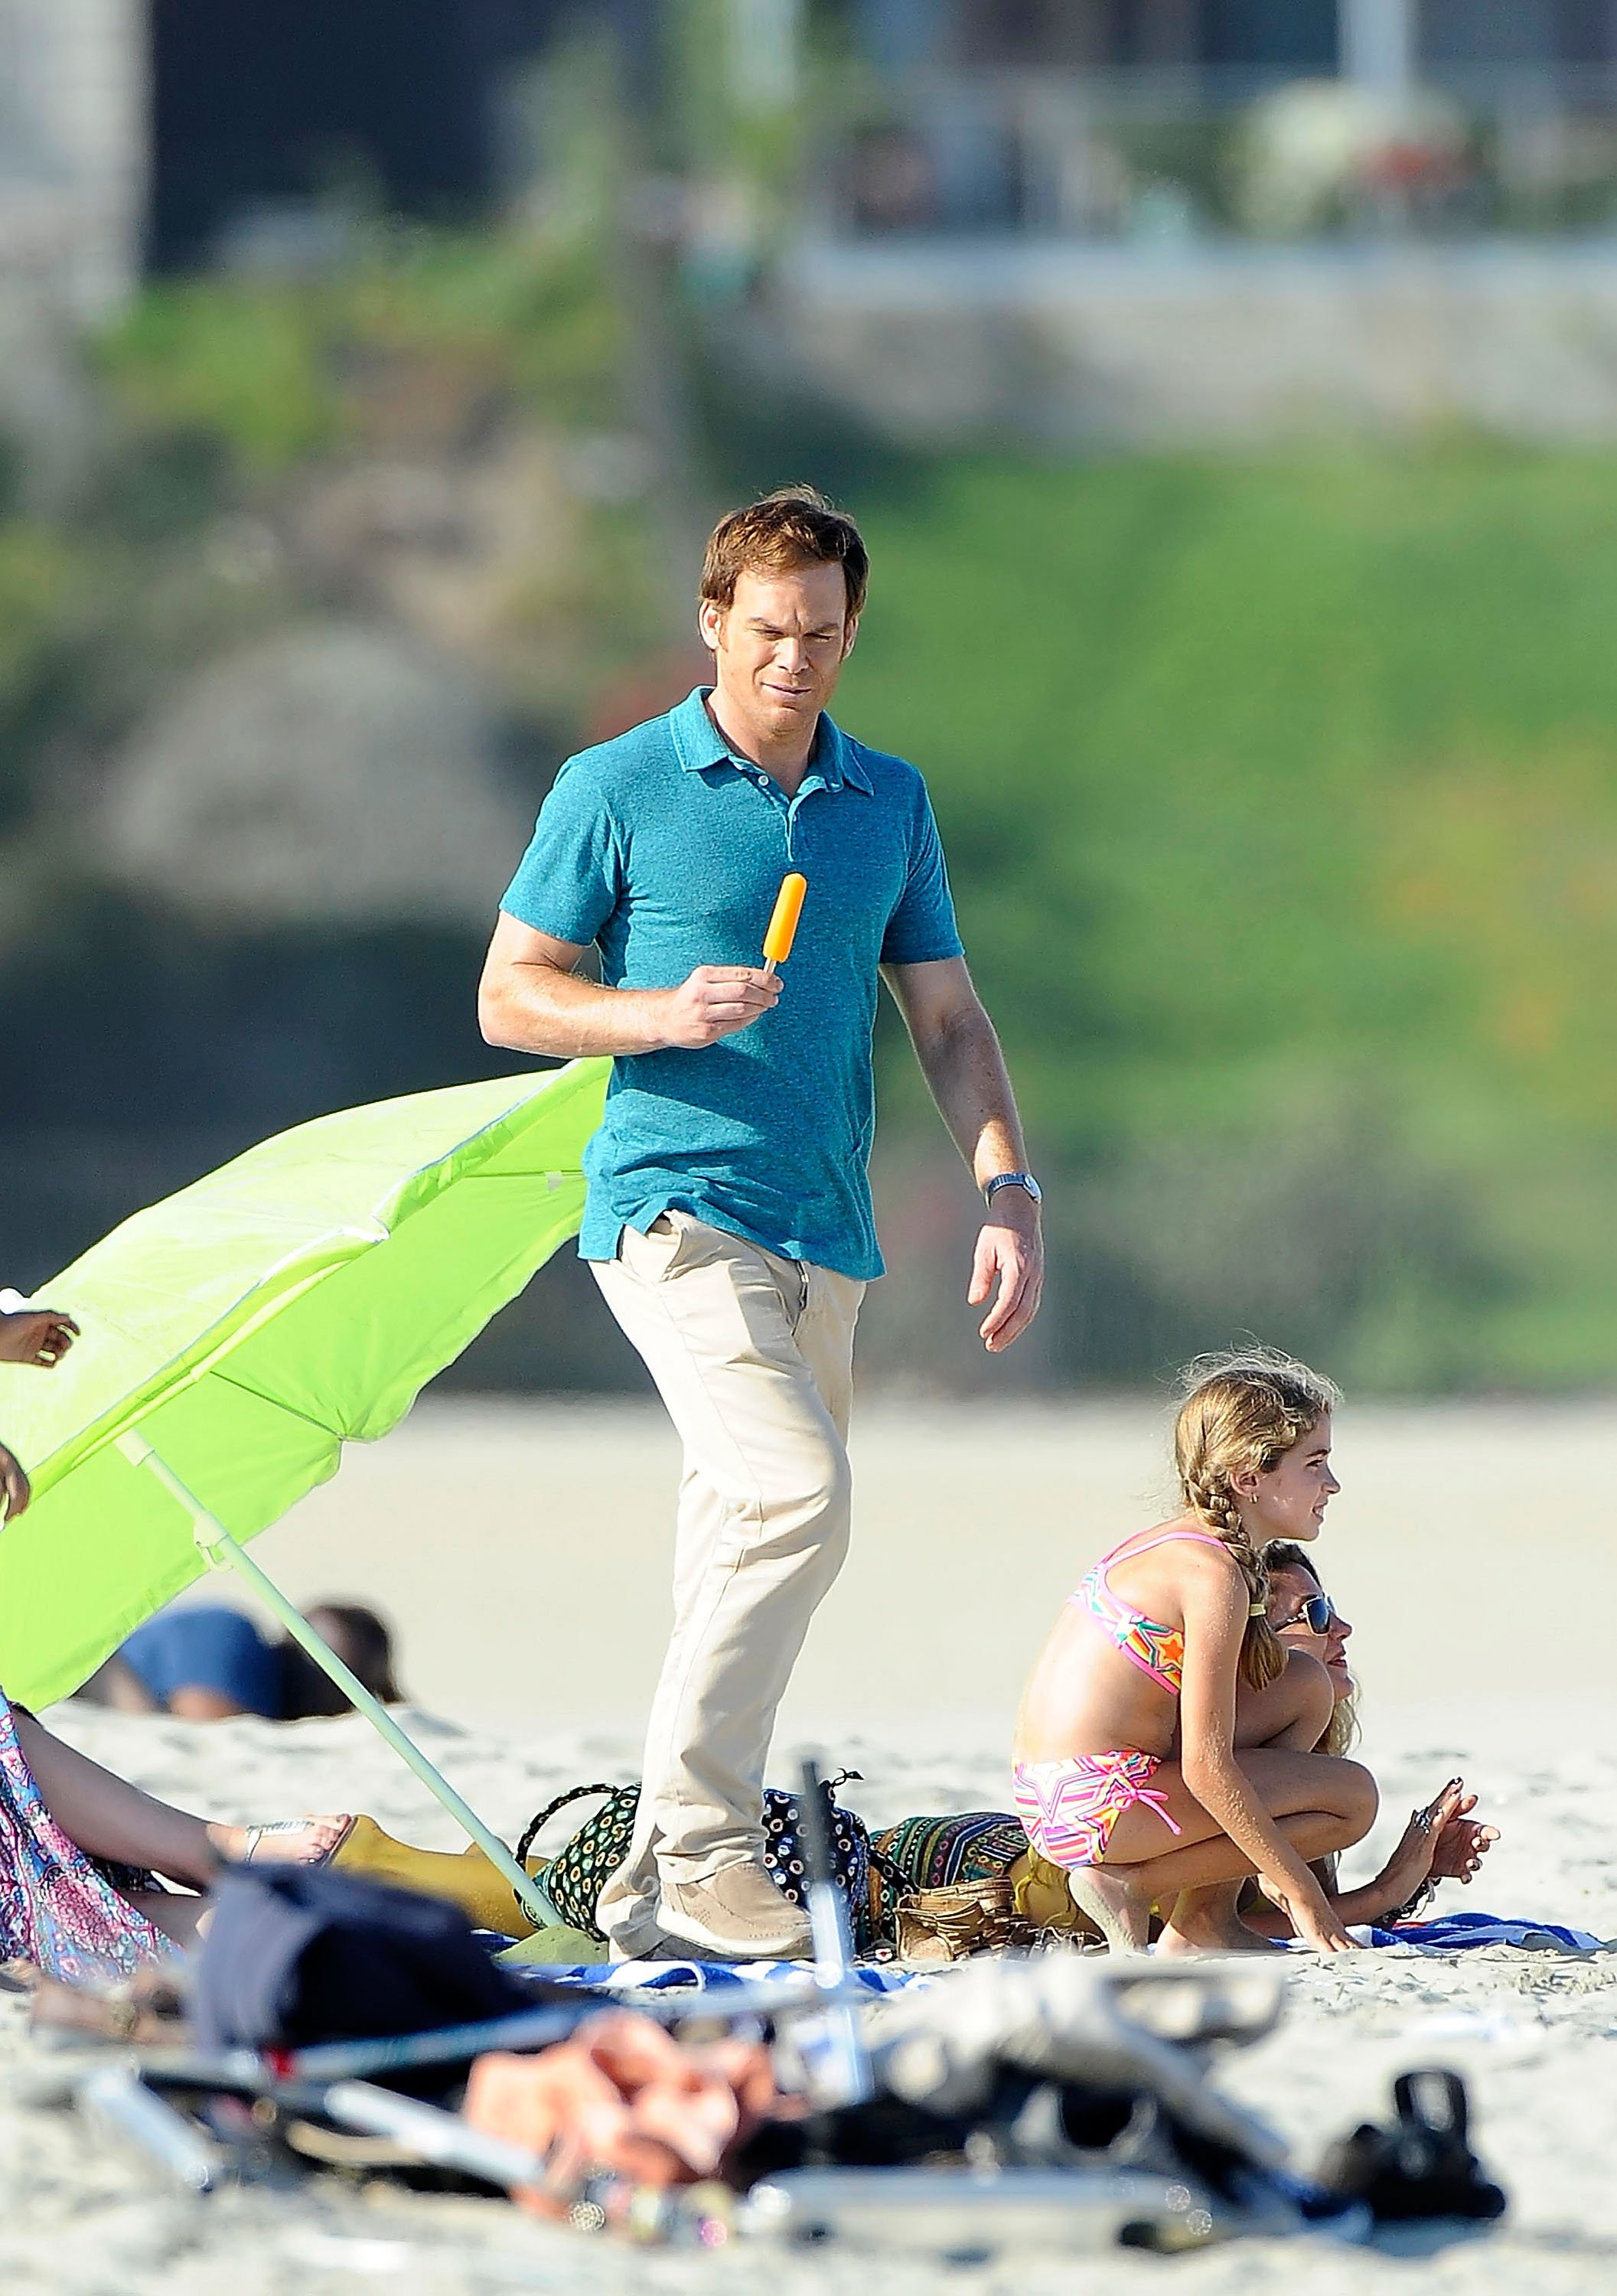 Michael C. Hall as Dexter Morgan is seen walking on the beach, holding an ice pop while filming a scene for 'Dexter'